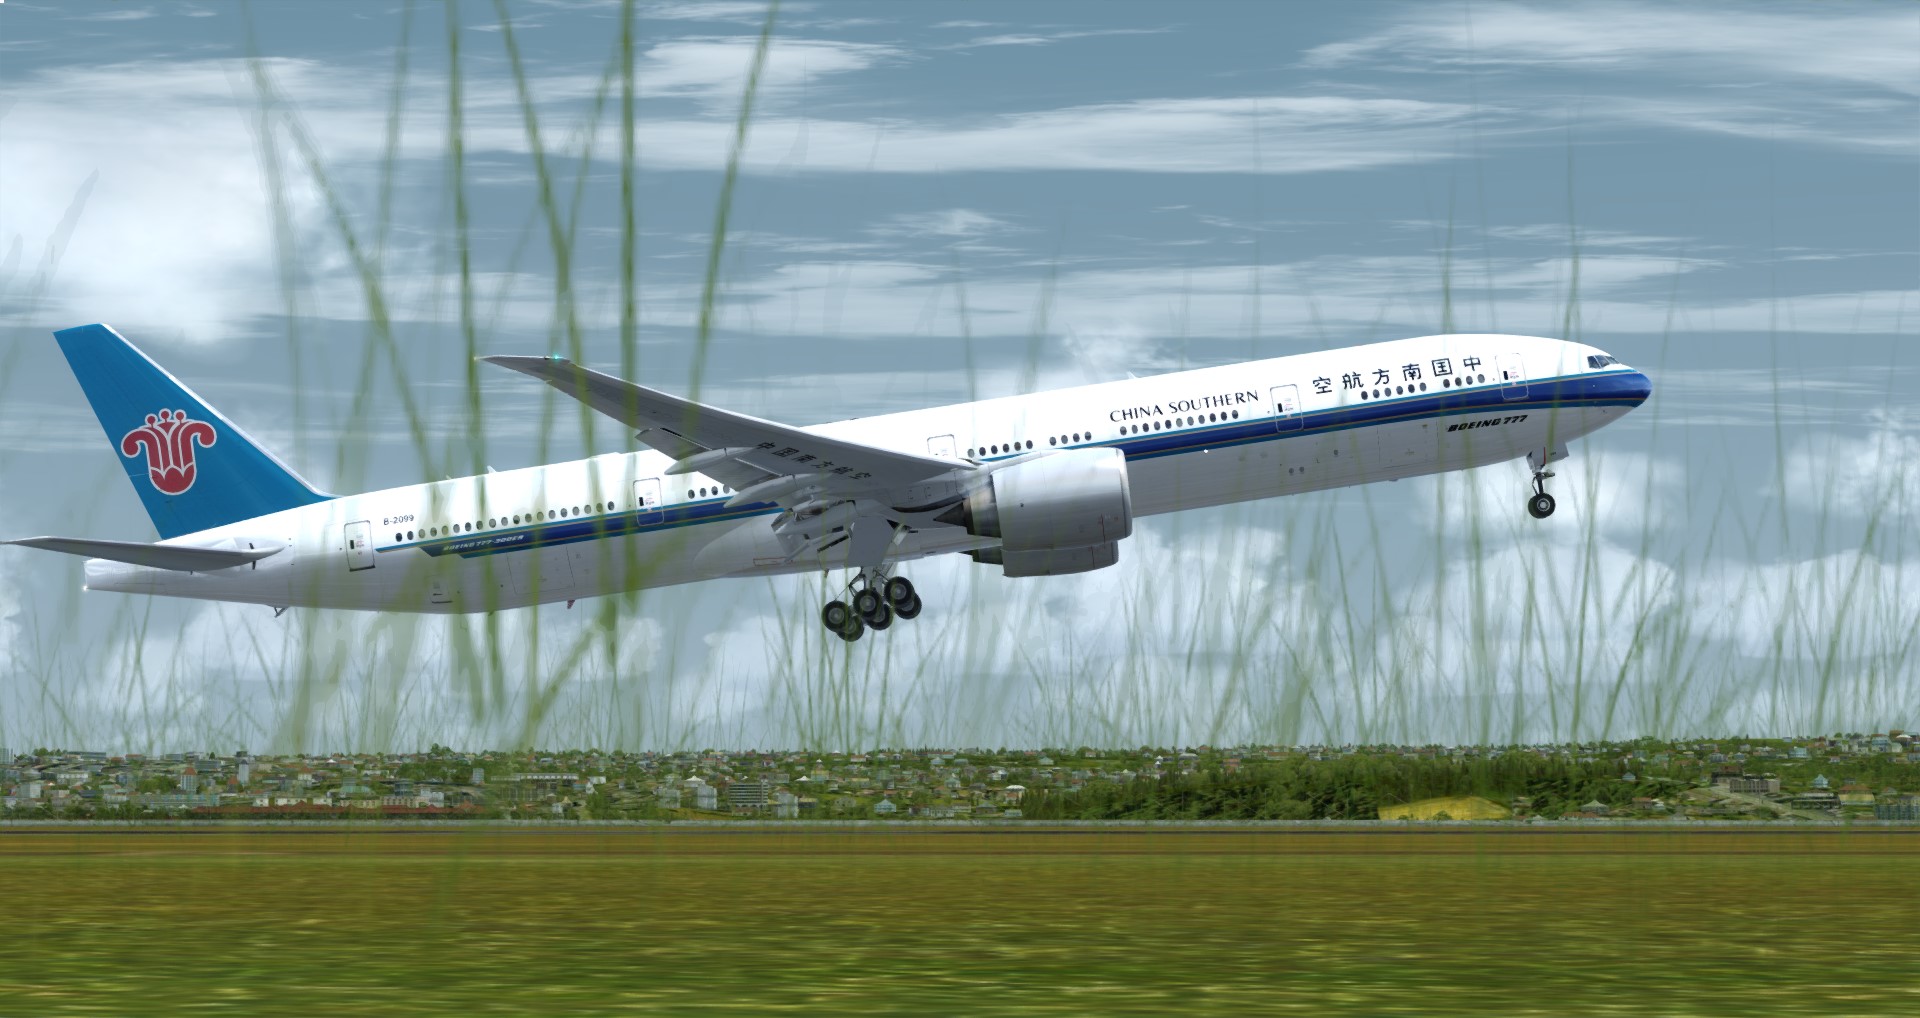 P3D V4 77W China Southern Airlines WADD-ZGGG 营救同胞-8082 